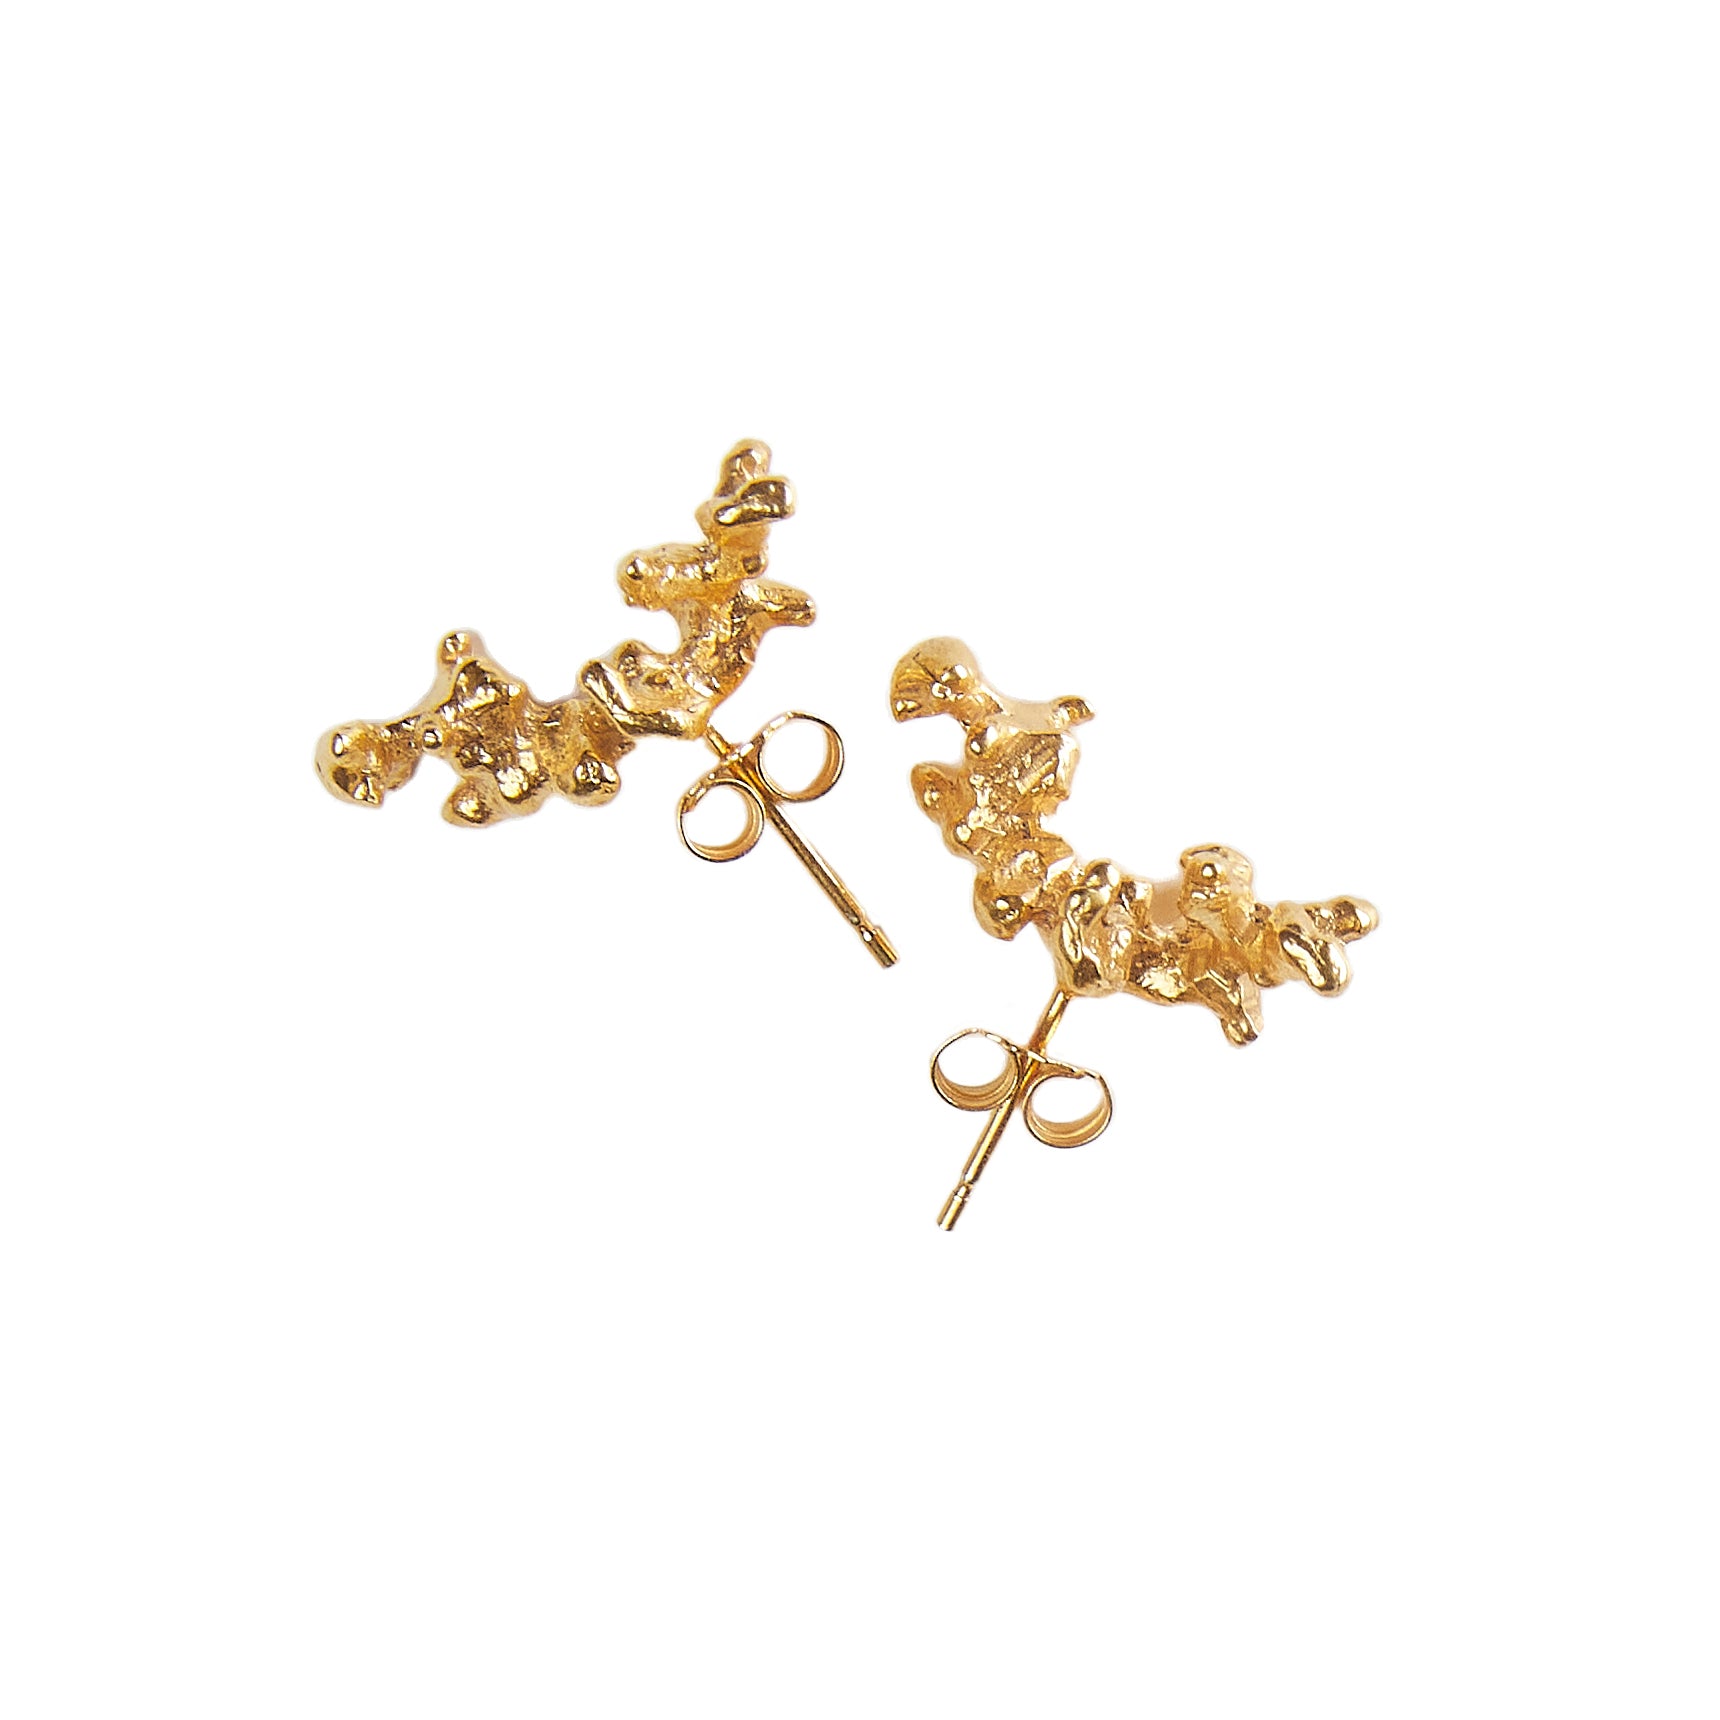 Corallia Nephos Earrings - Gold Plated Brass